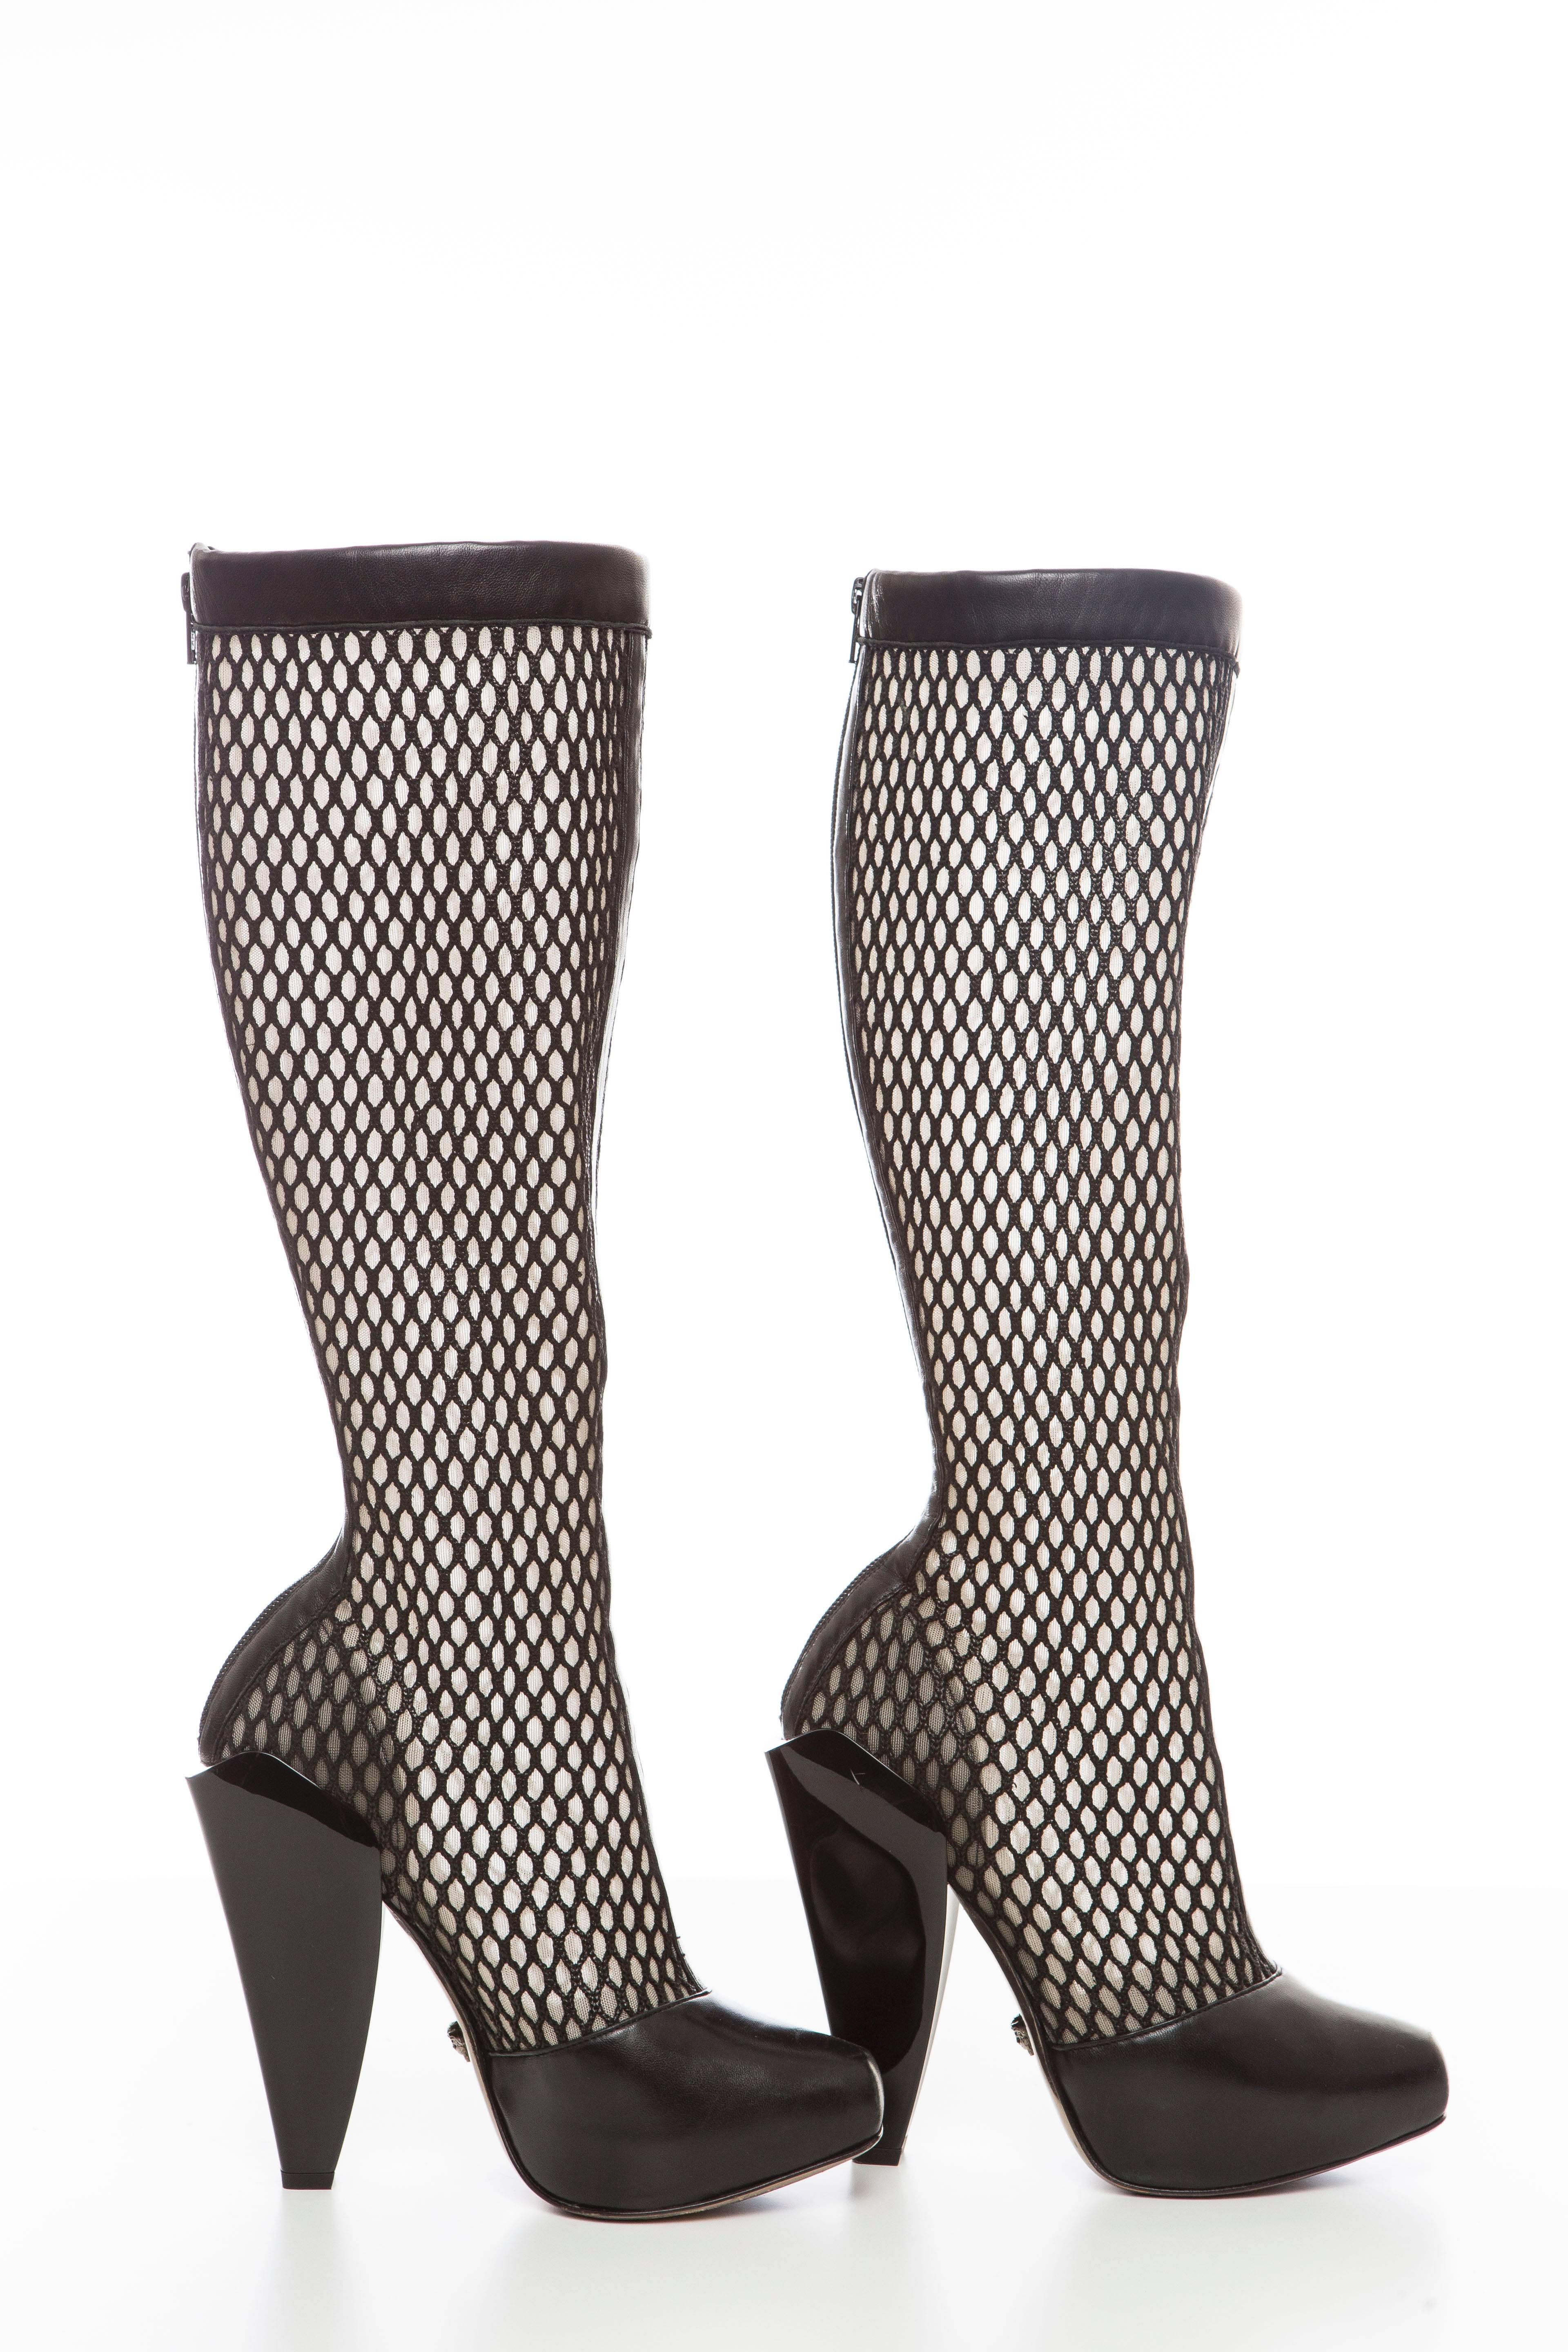 Versace Black Woven Mesh Boots, Autumn - Winter 2012 In Excellent Condition For Sale In Cincinnati, OH